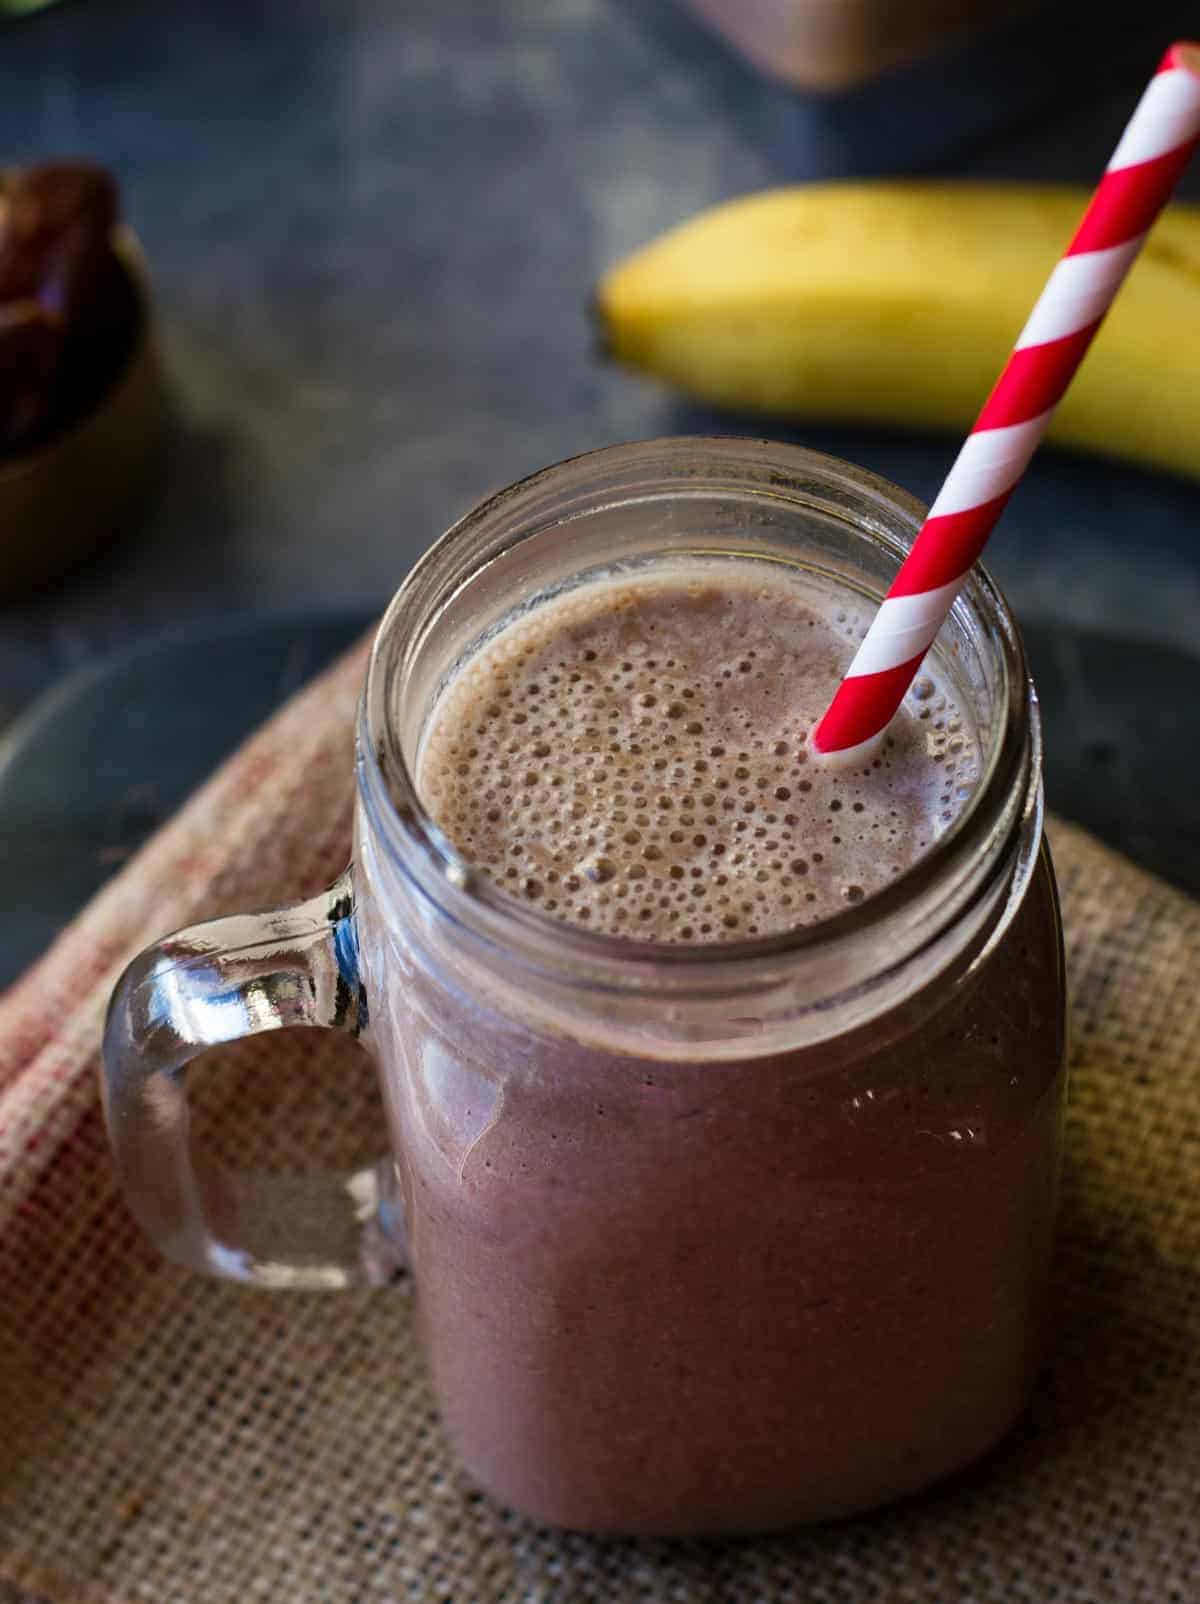 Chocolate almond smoothie served in a glass jar with a red and white straw